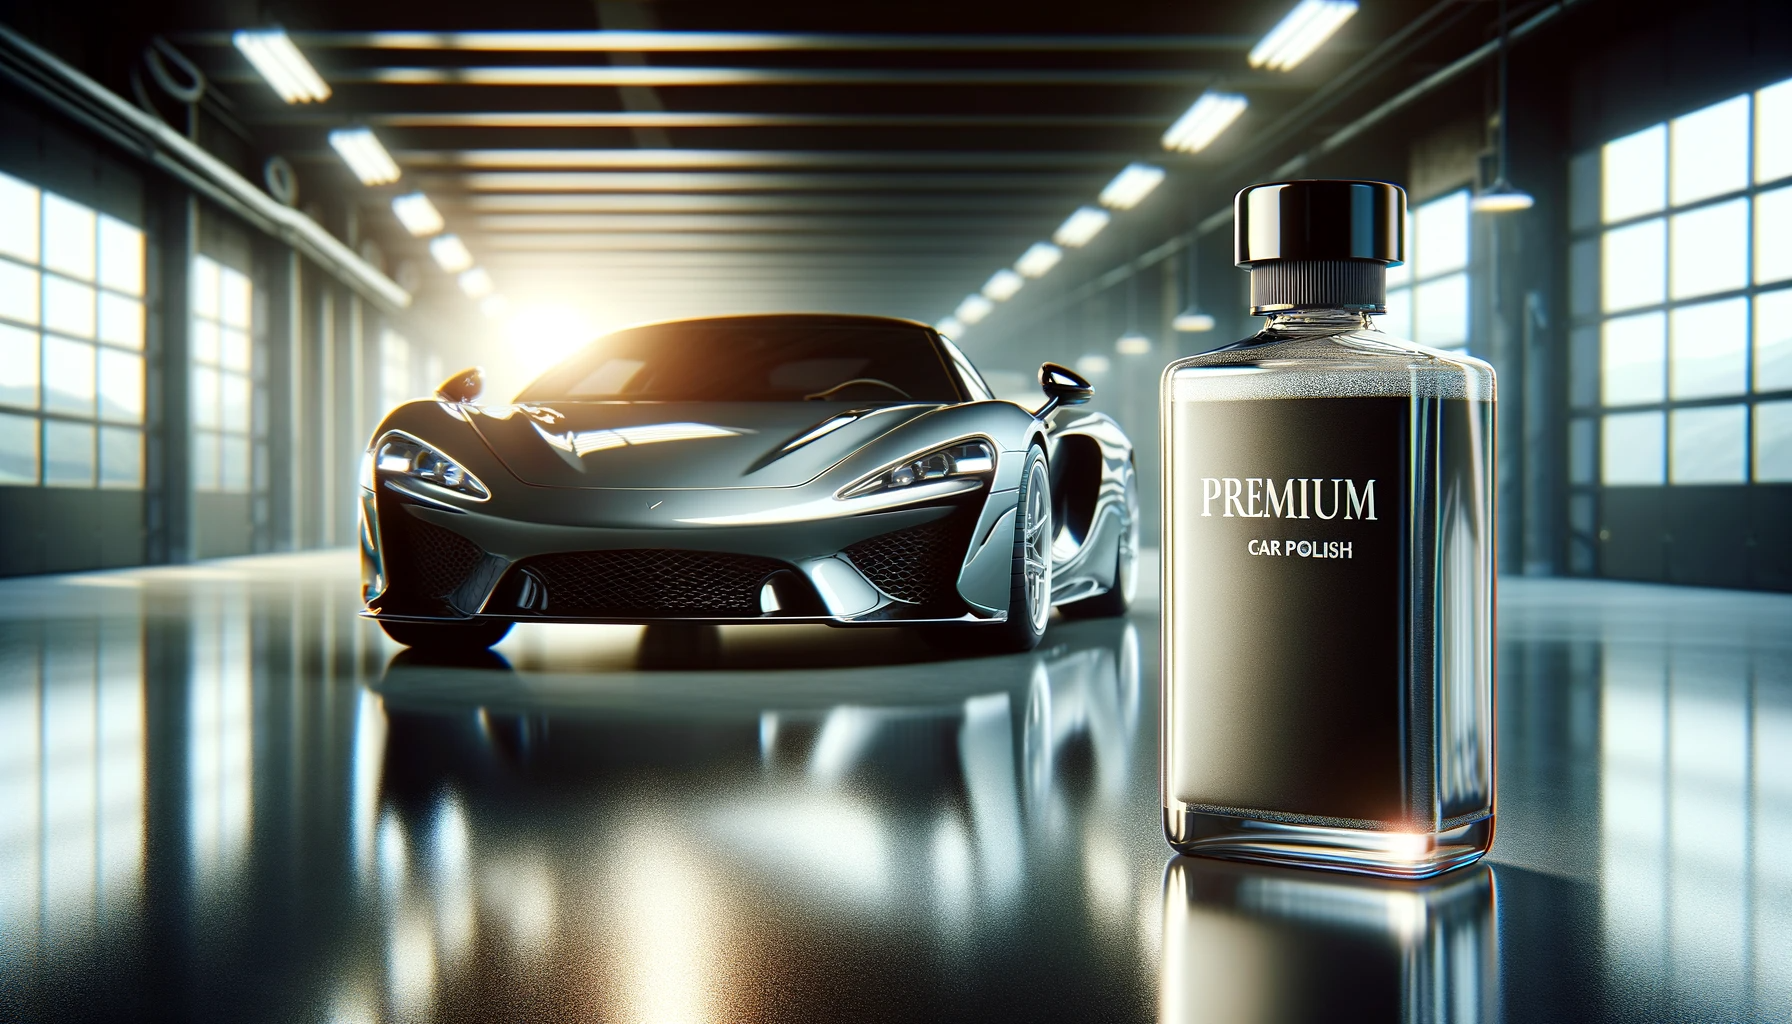 Premium car polish with sexy car in background